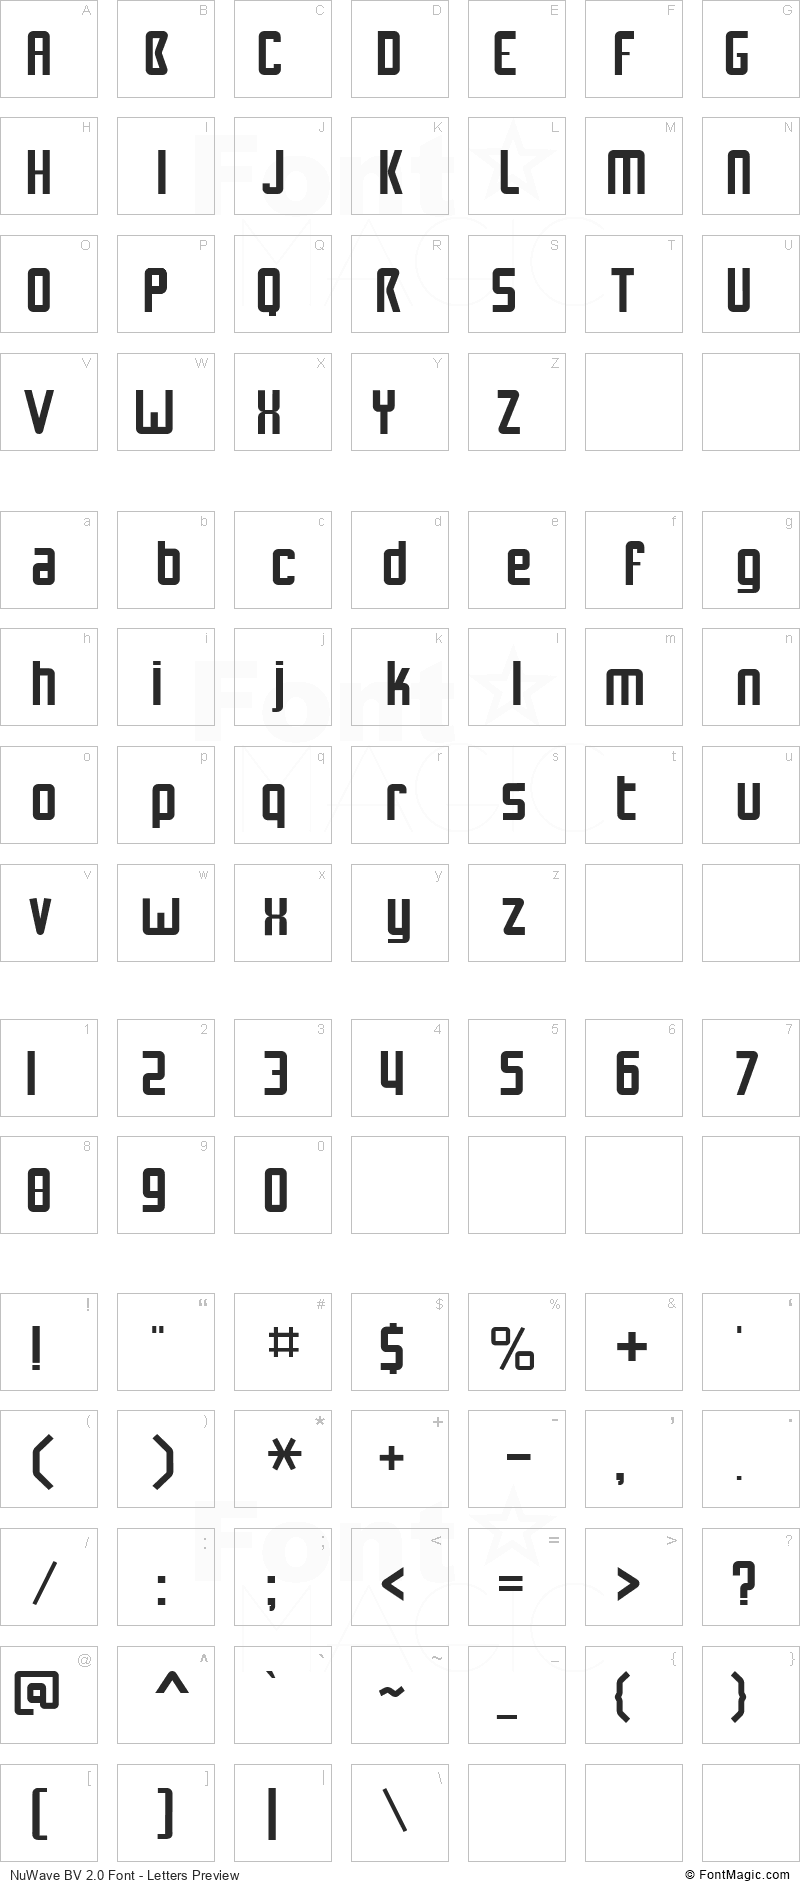 NuWave BV 2.0 Font - All Latters Preview Chart